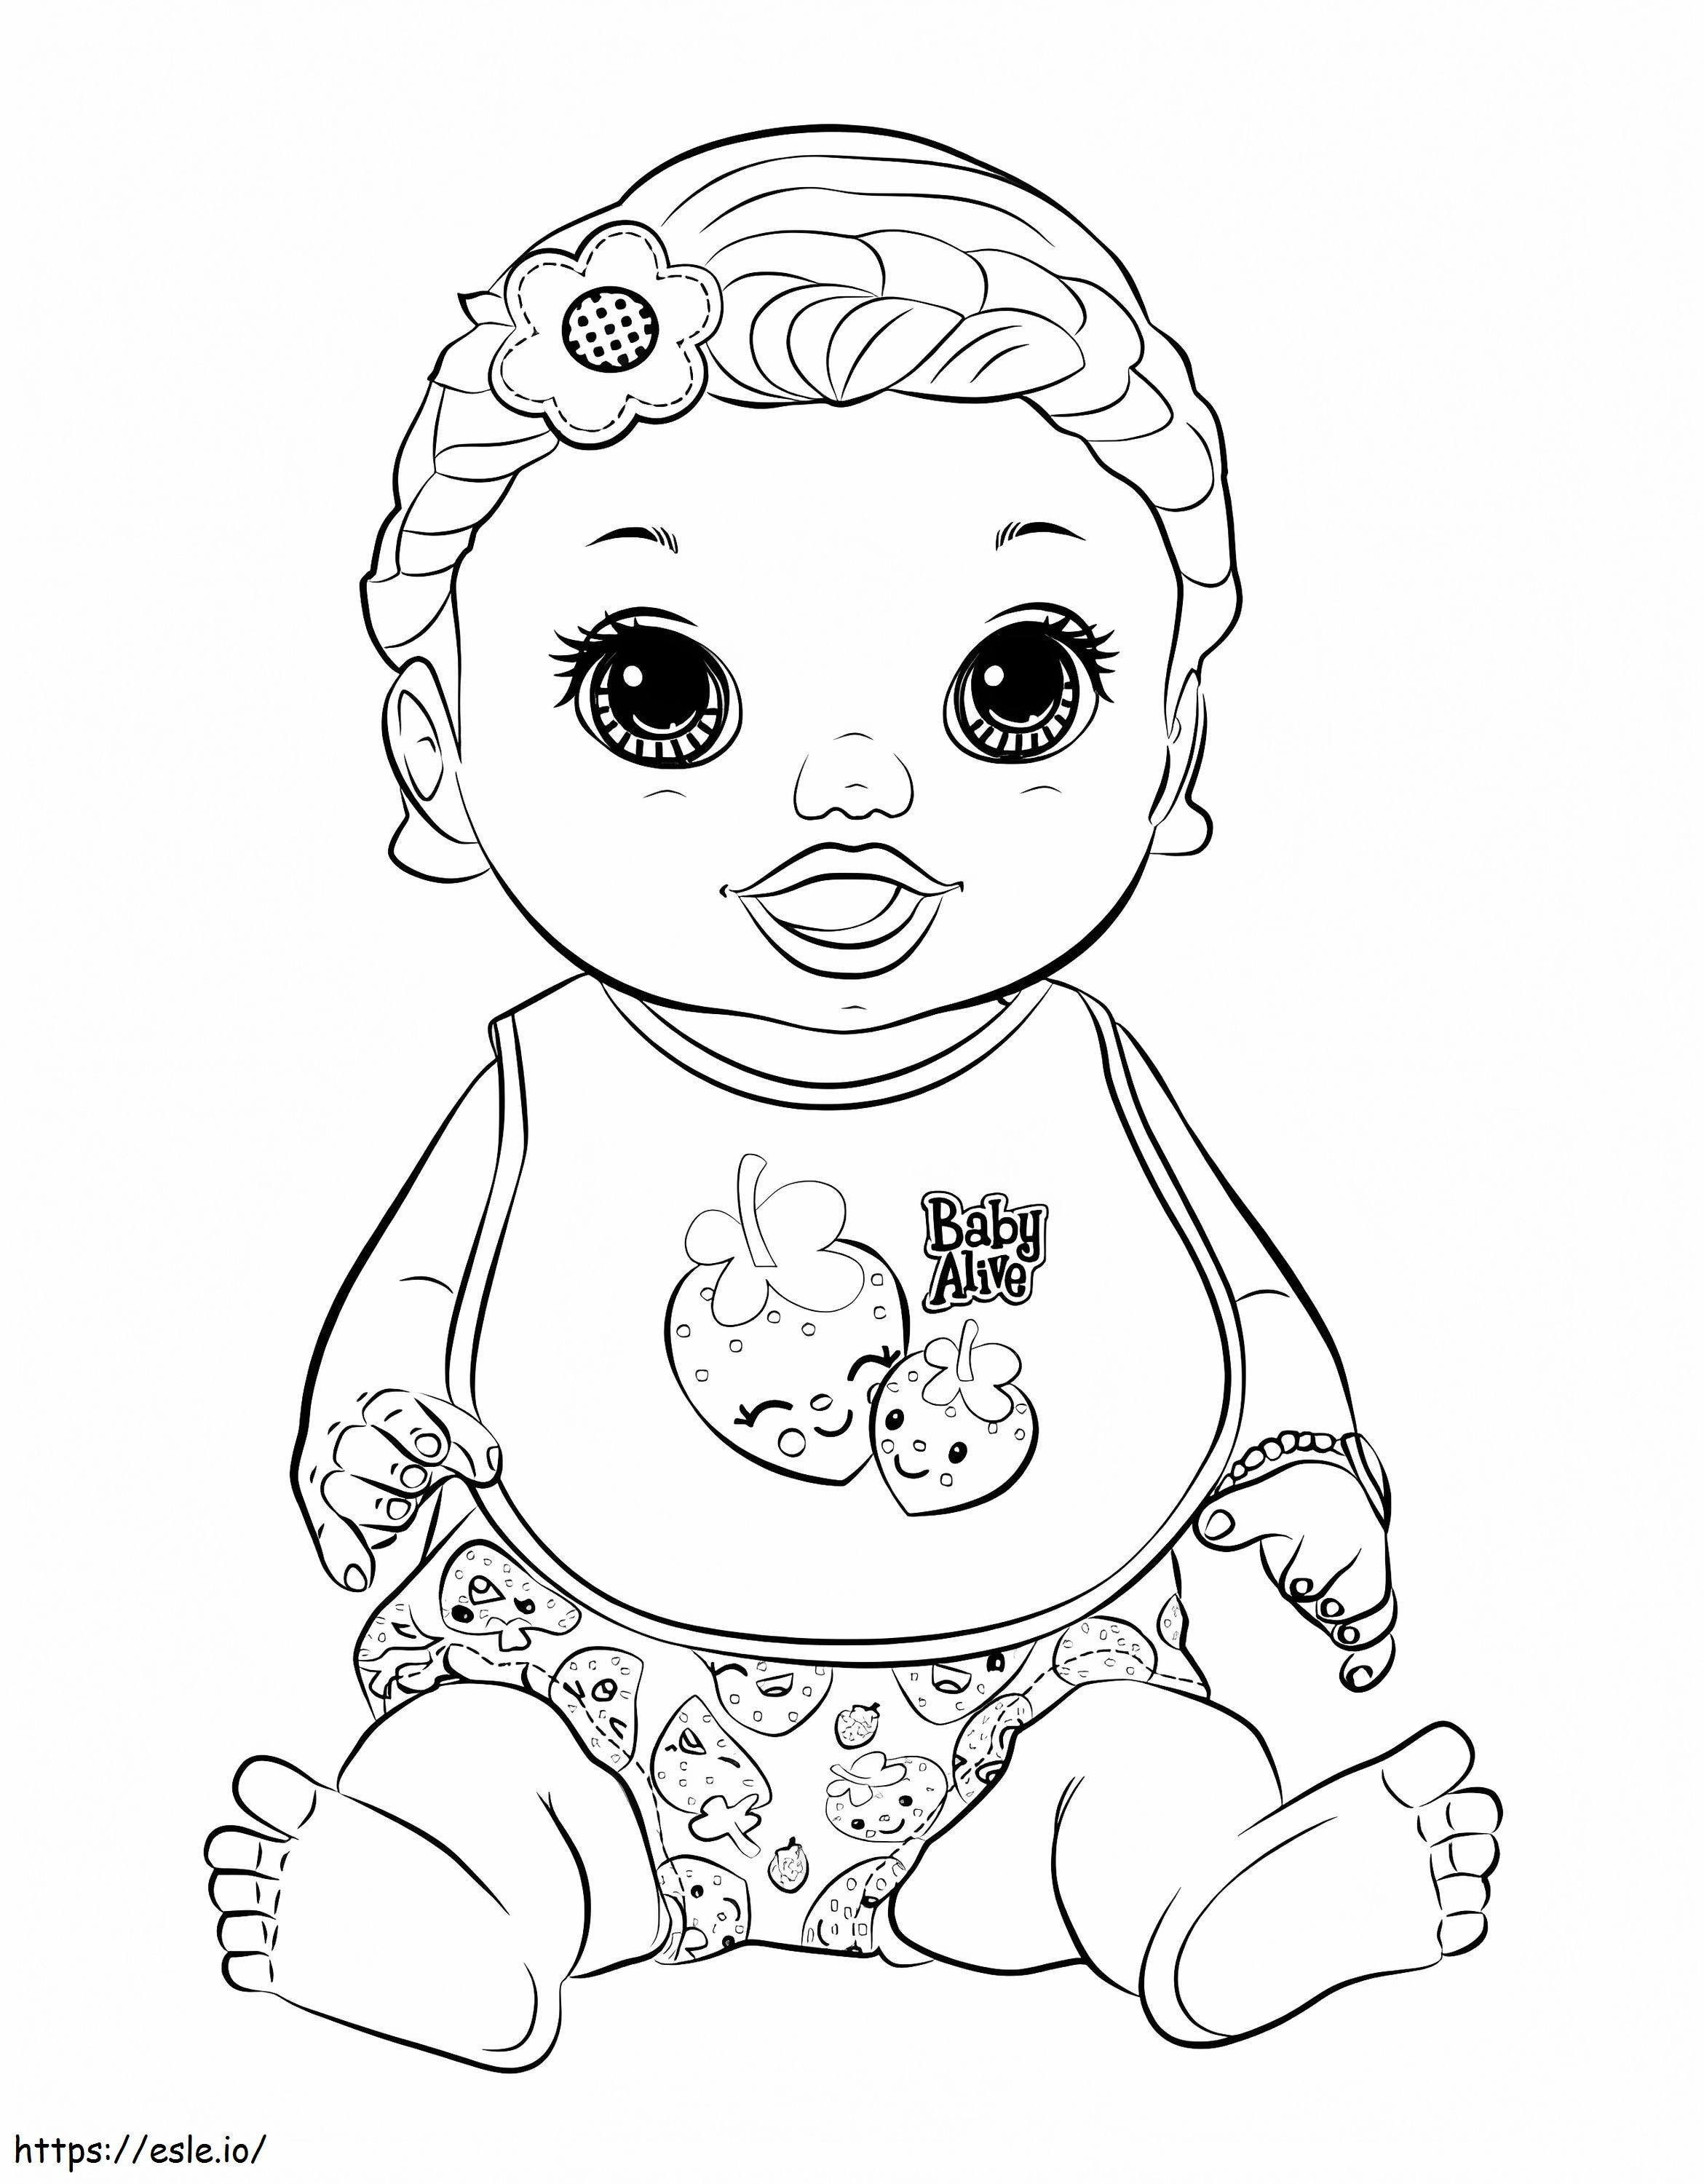 Printable Baby Alive coloring page